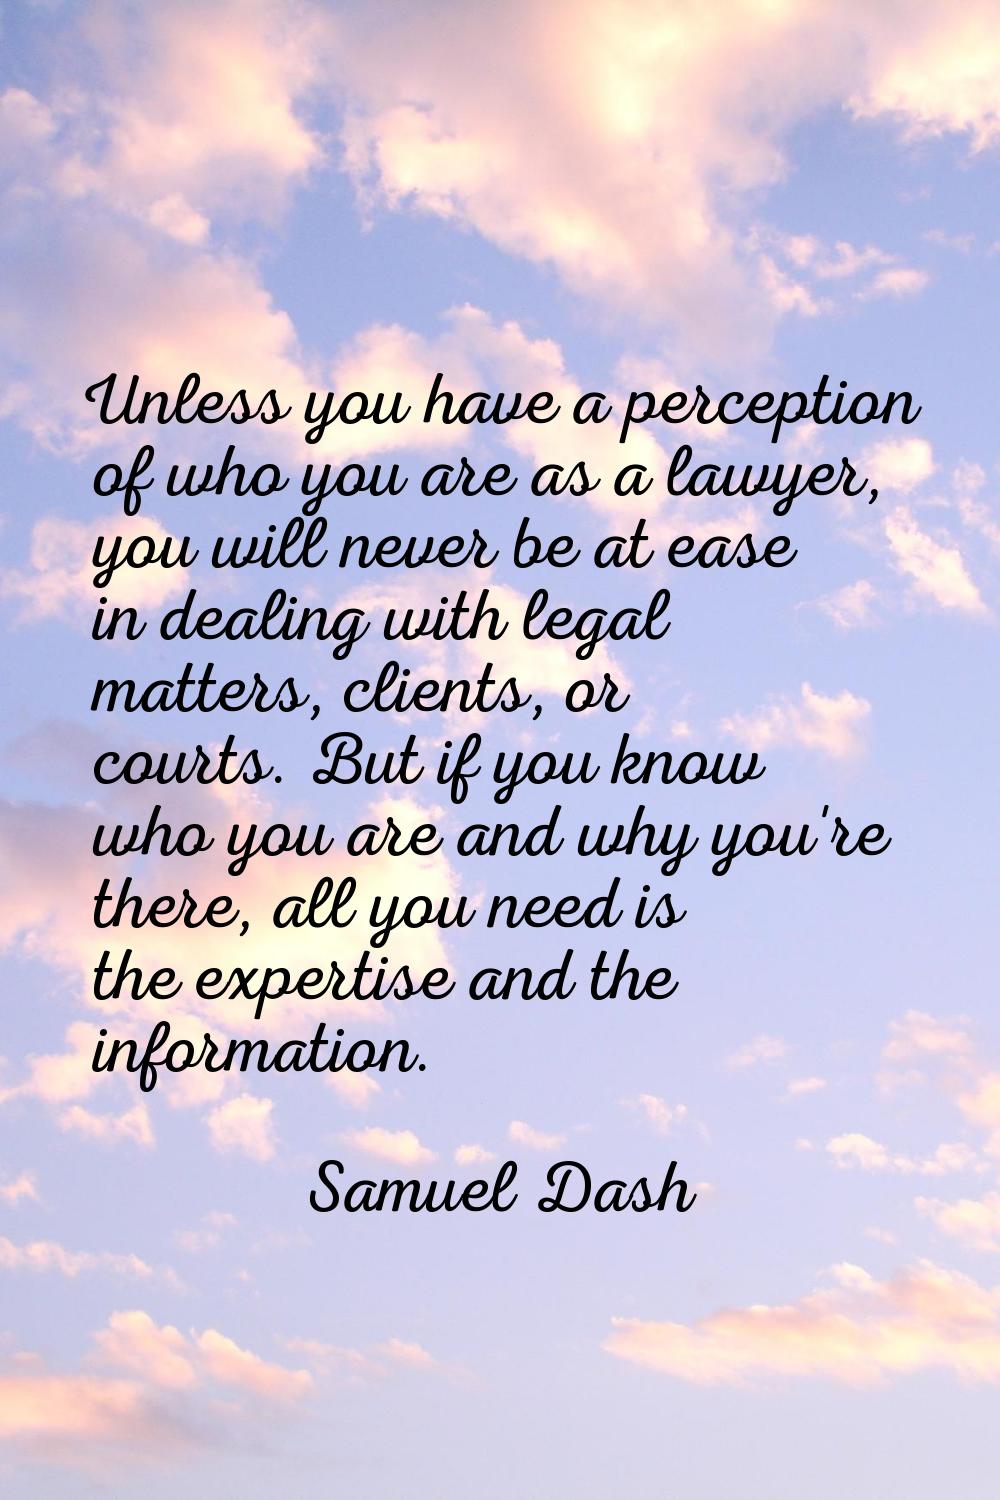 Unless you have a perception of who you are as a lawyer, you will never be at ease in dealing with 